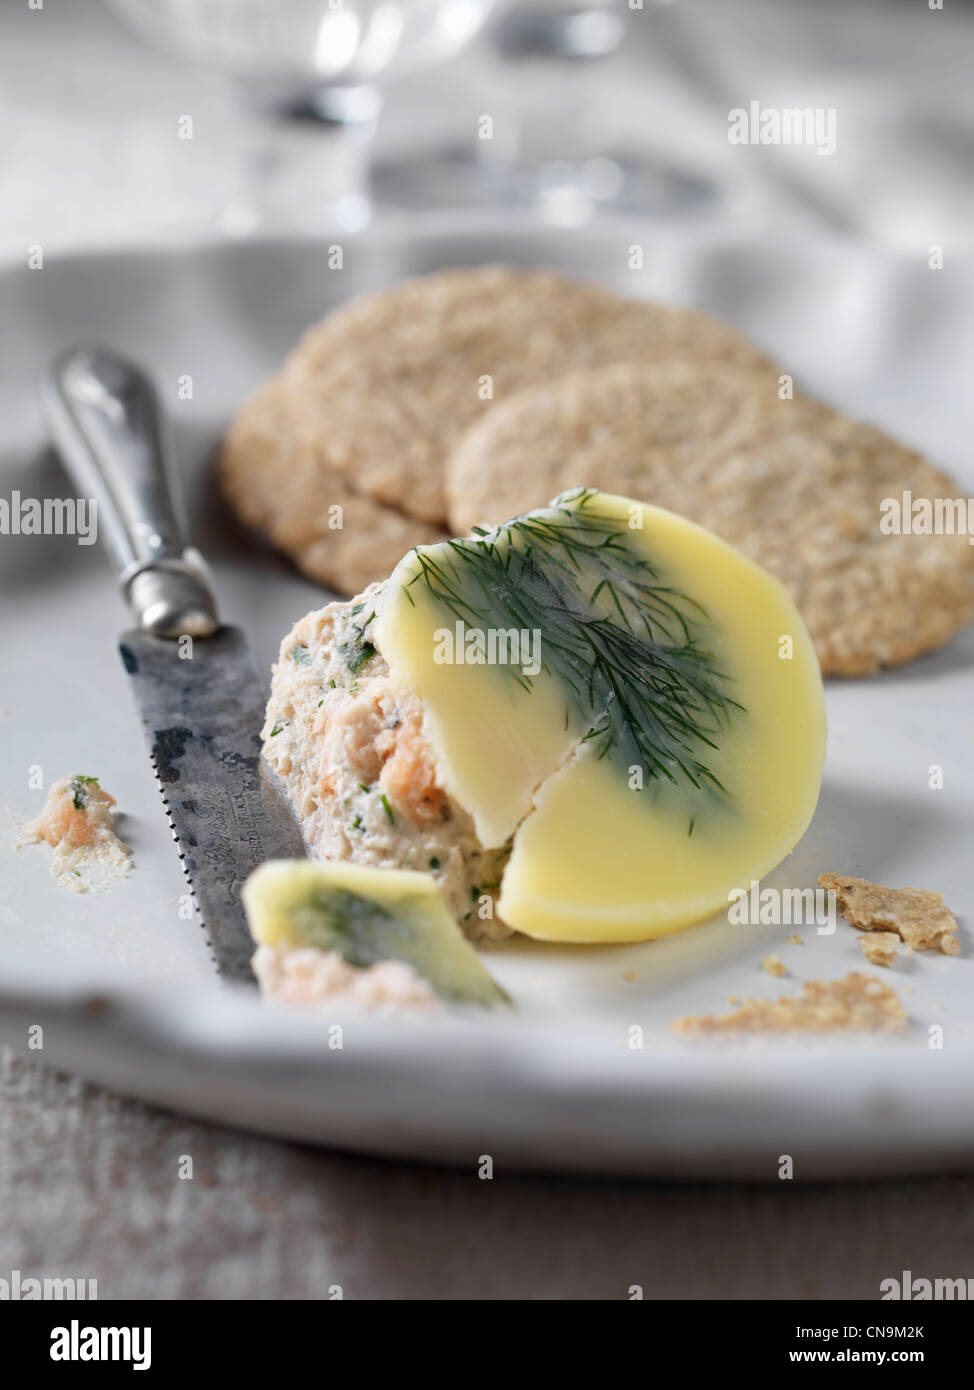 Plate of salmon pate with crackers Stock Photo